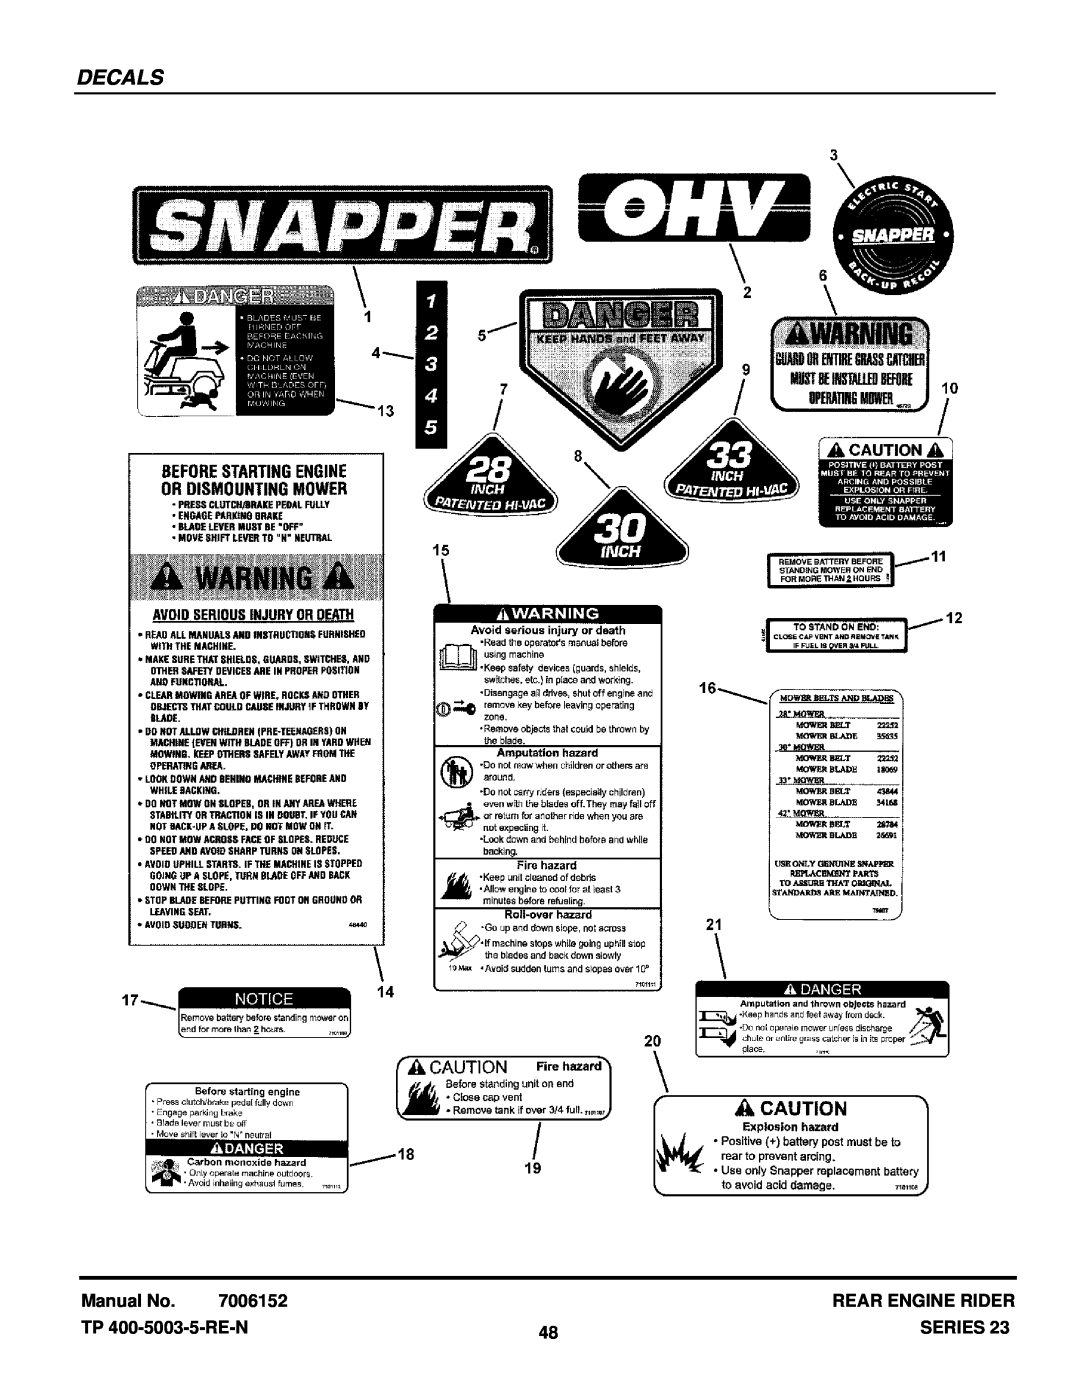 Snapper 281023BVE manual Decals, Manual No, 7006152, Rear Engine Rider, TP 400-5003-5-RE-N, Series 